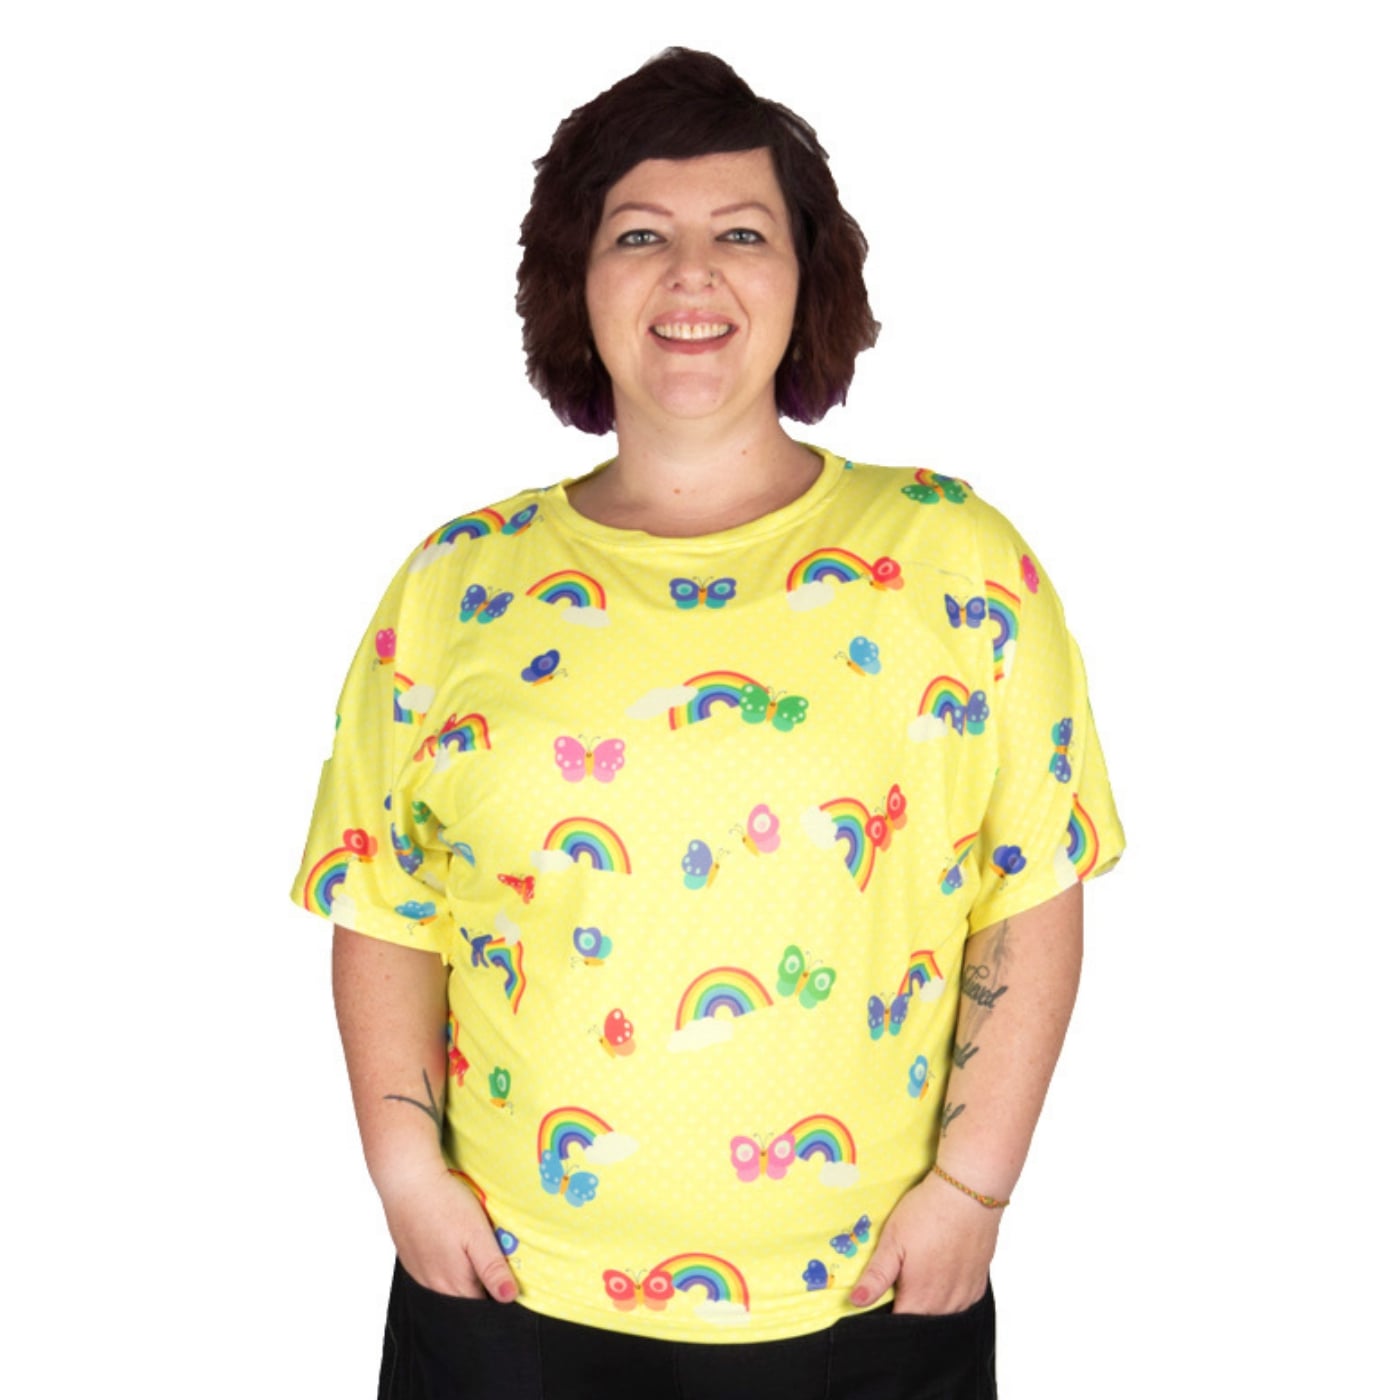 Sunshine Batwing Top by RainbowsAndFairies.com.au (Yellow Polka Dot - Butterfly - Rainbows - Clouds - Vintage Inspired - Kitsch - Knit Top - Mod) - SKU: CL_BATOP_SUNSH_ORG - Pic-03